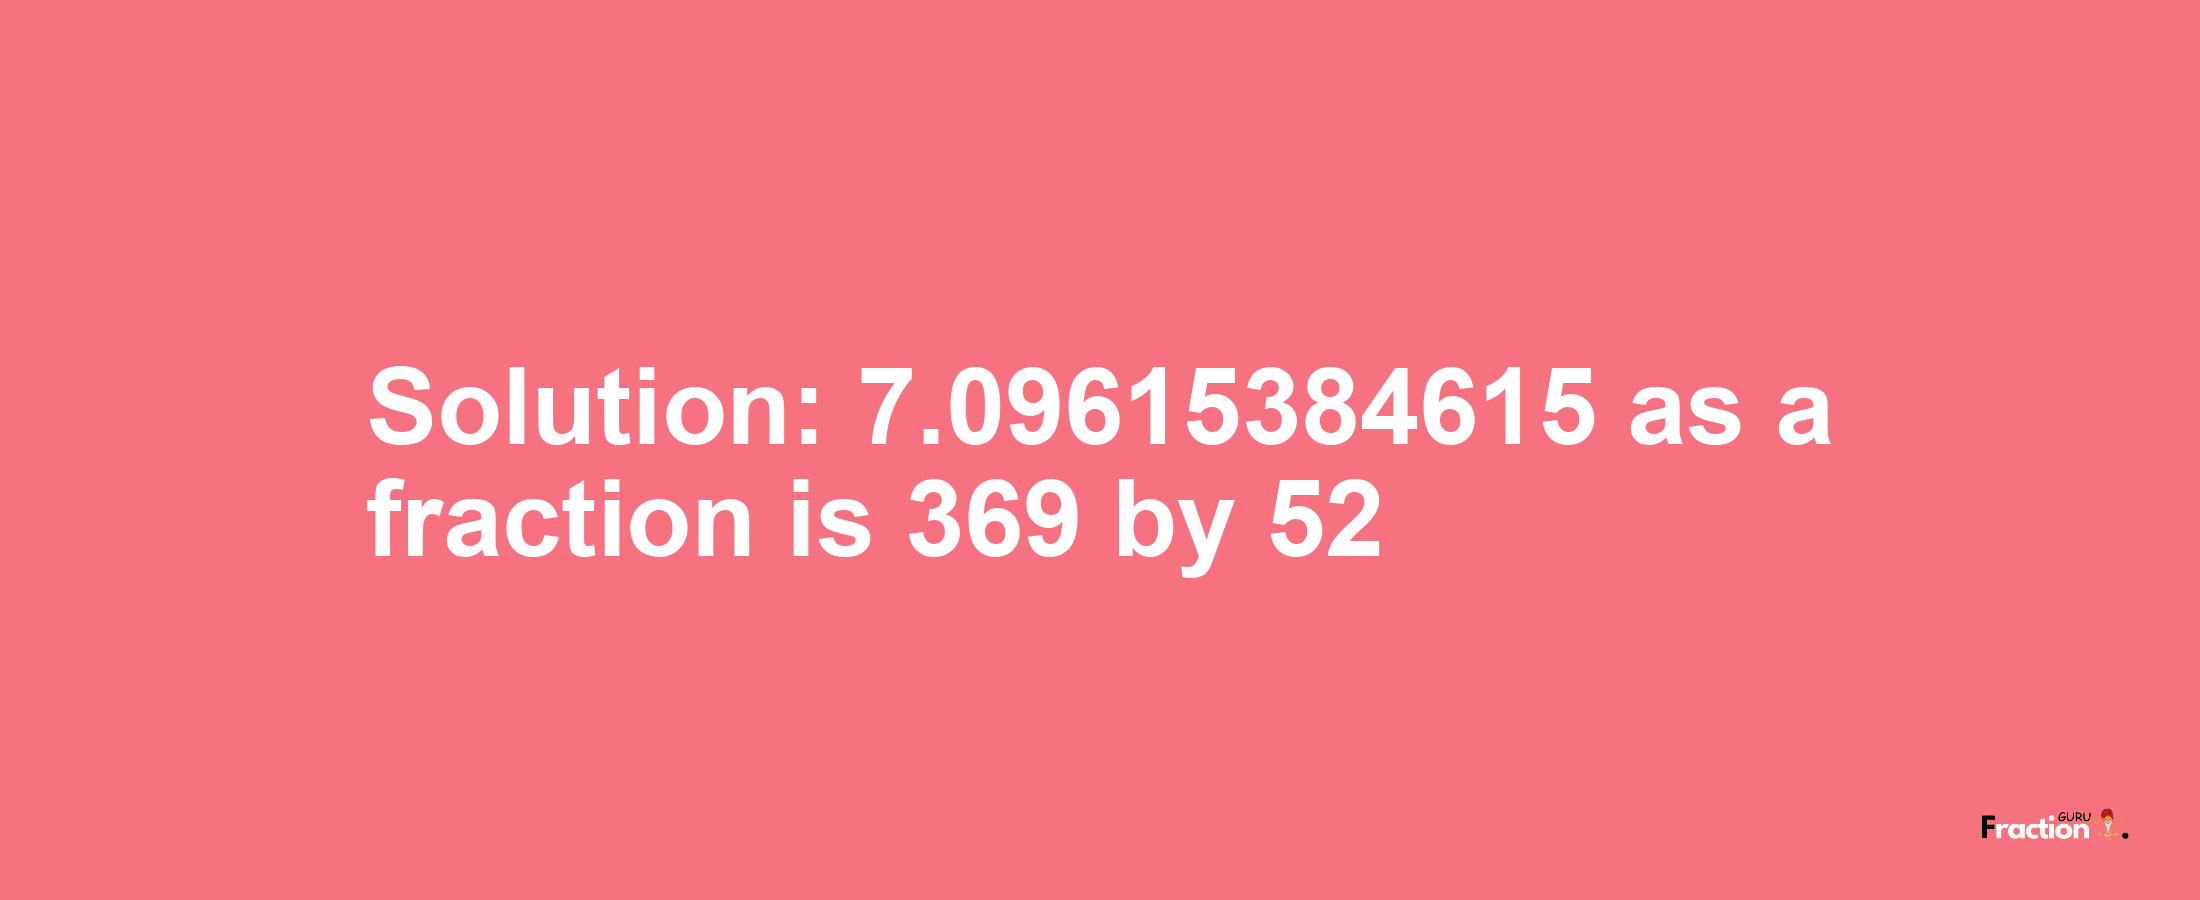 Solution:7.09615384615 as a fraction is 369/52